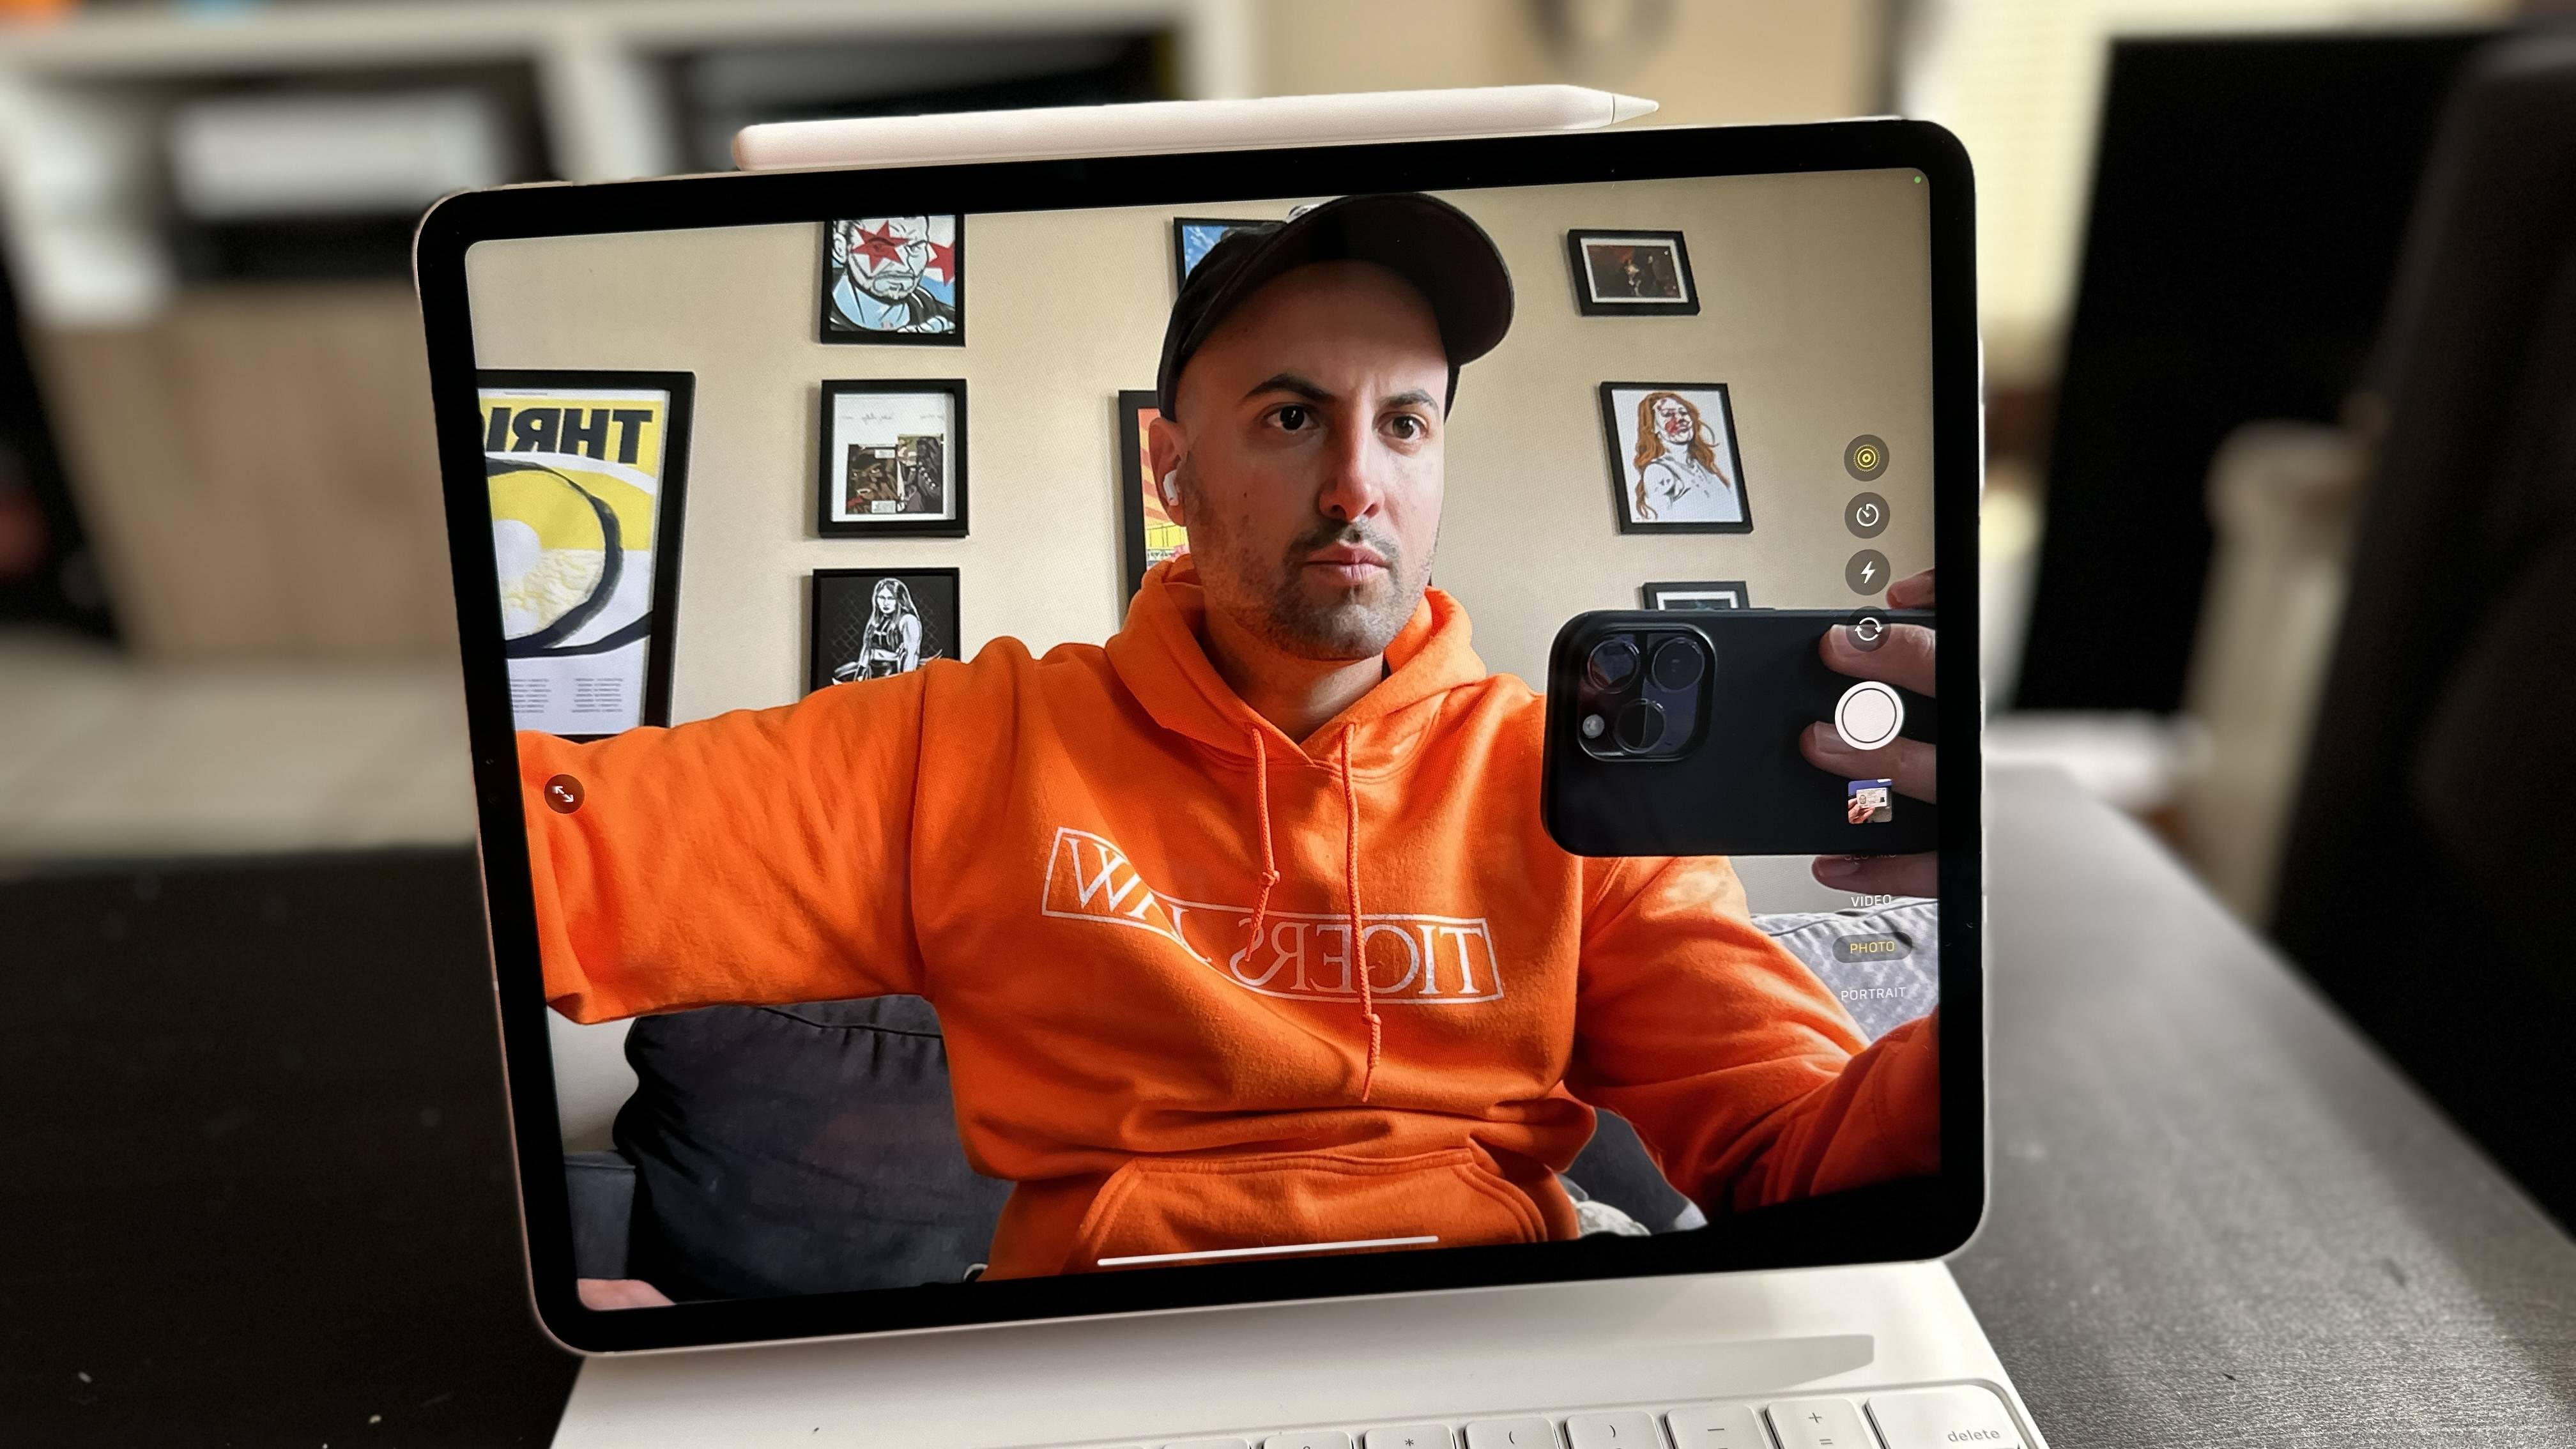 Apple iPad Pro 11 (2022) review: Maximum power in a pint-sized tablet